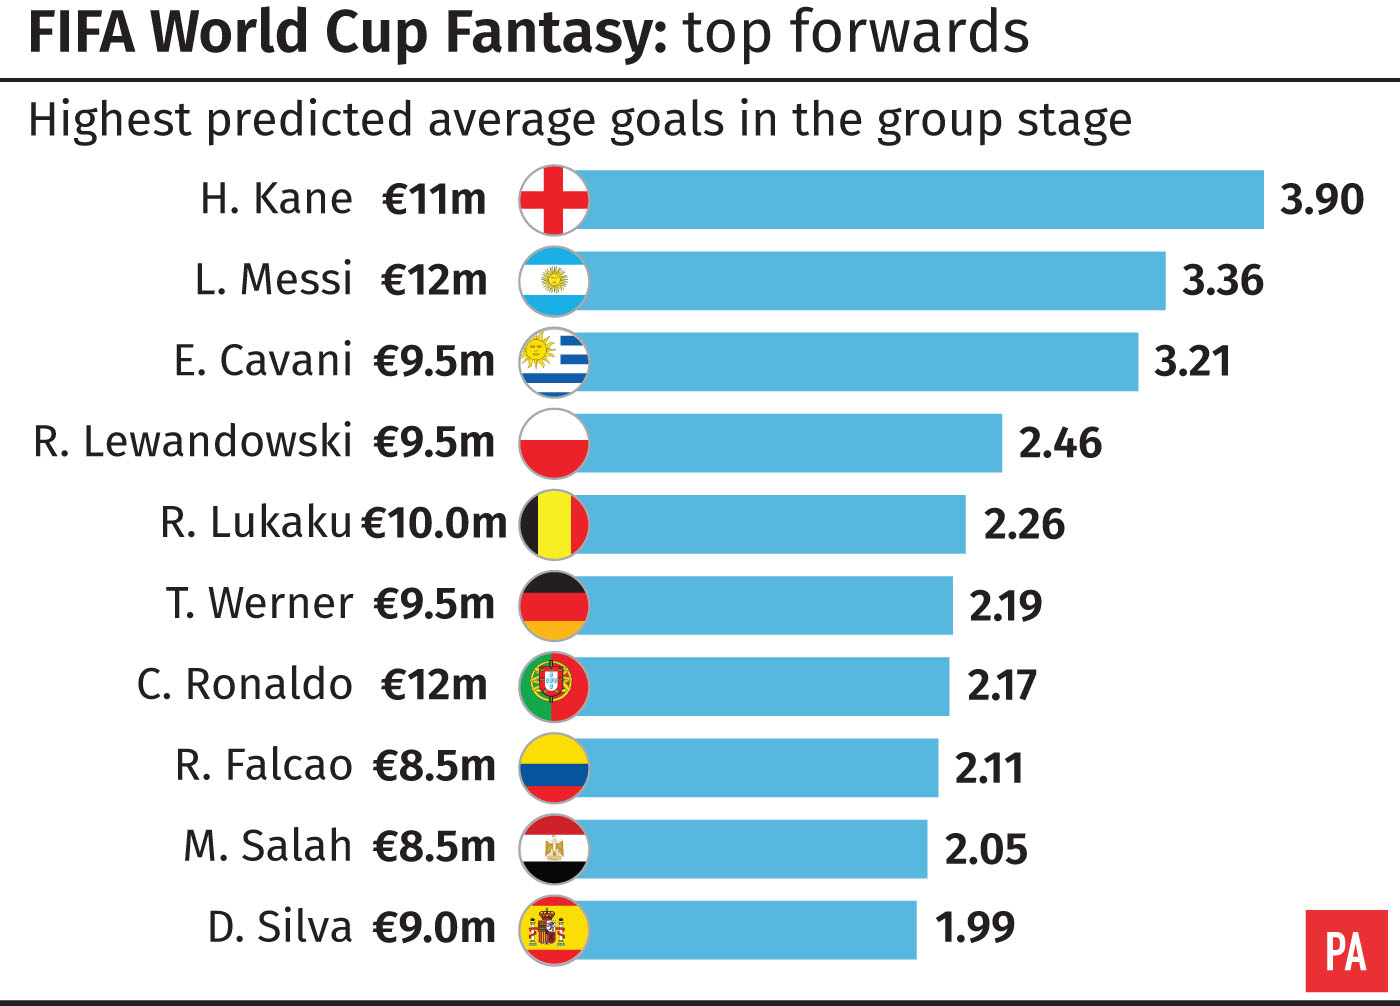 The highest predicted average goals at the group stage of the World Cup for forwards